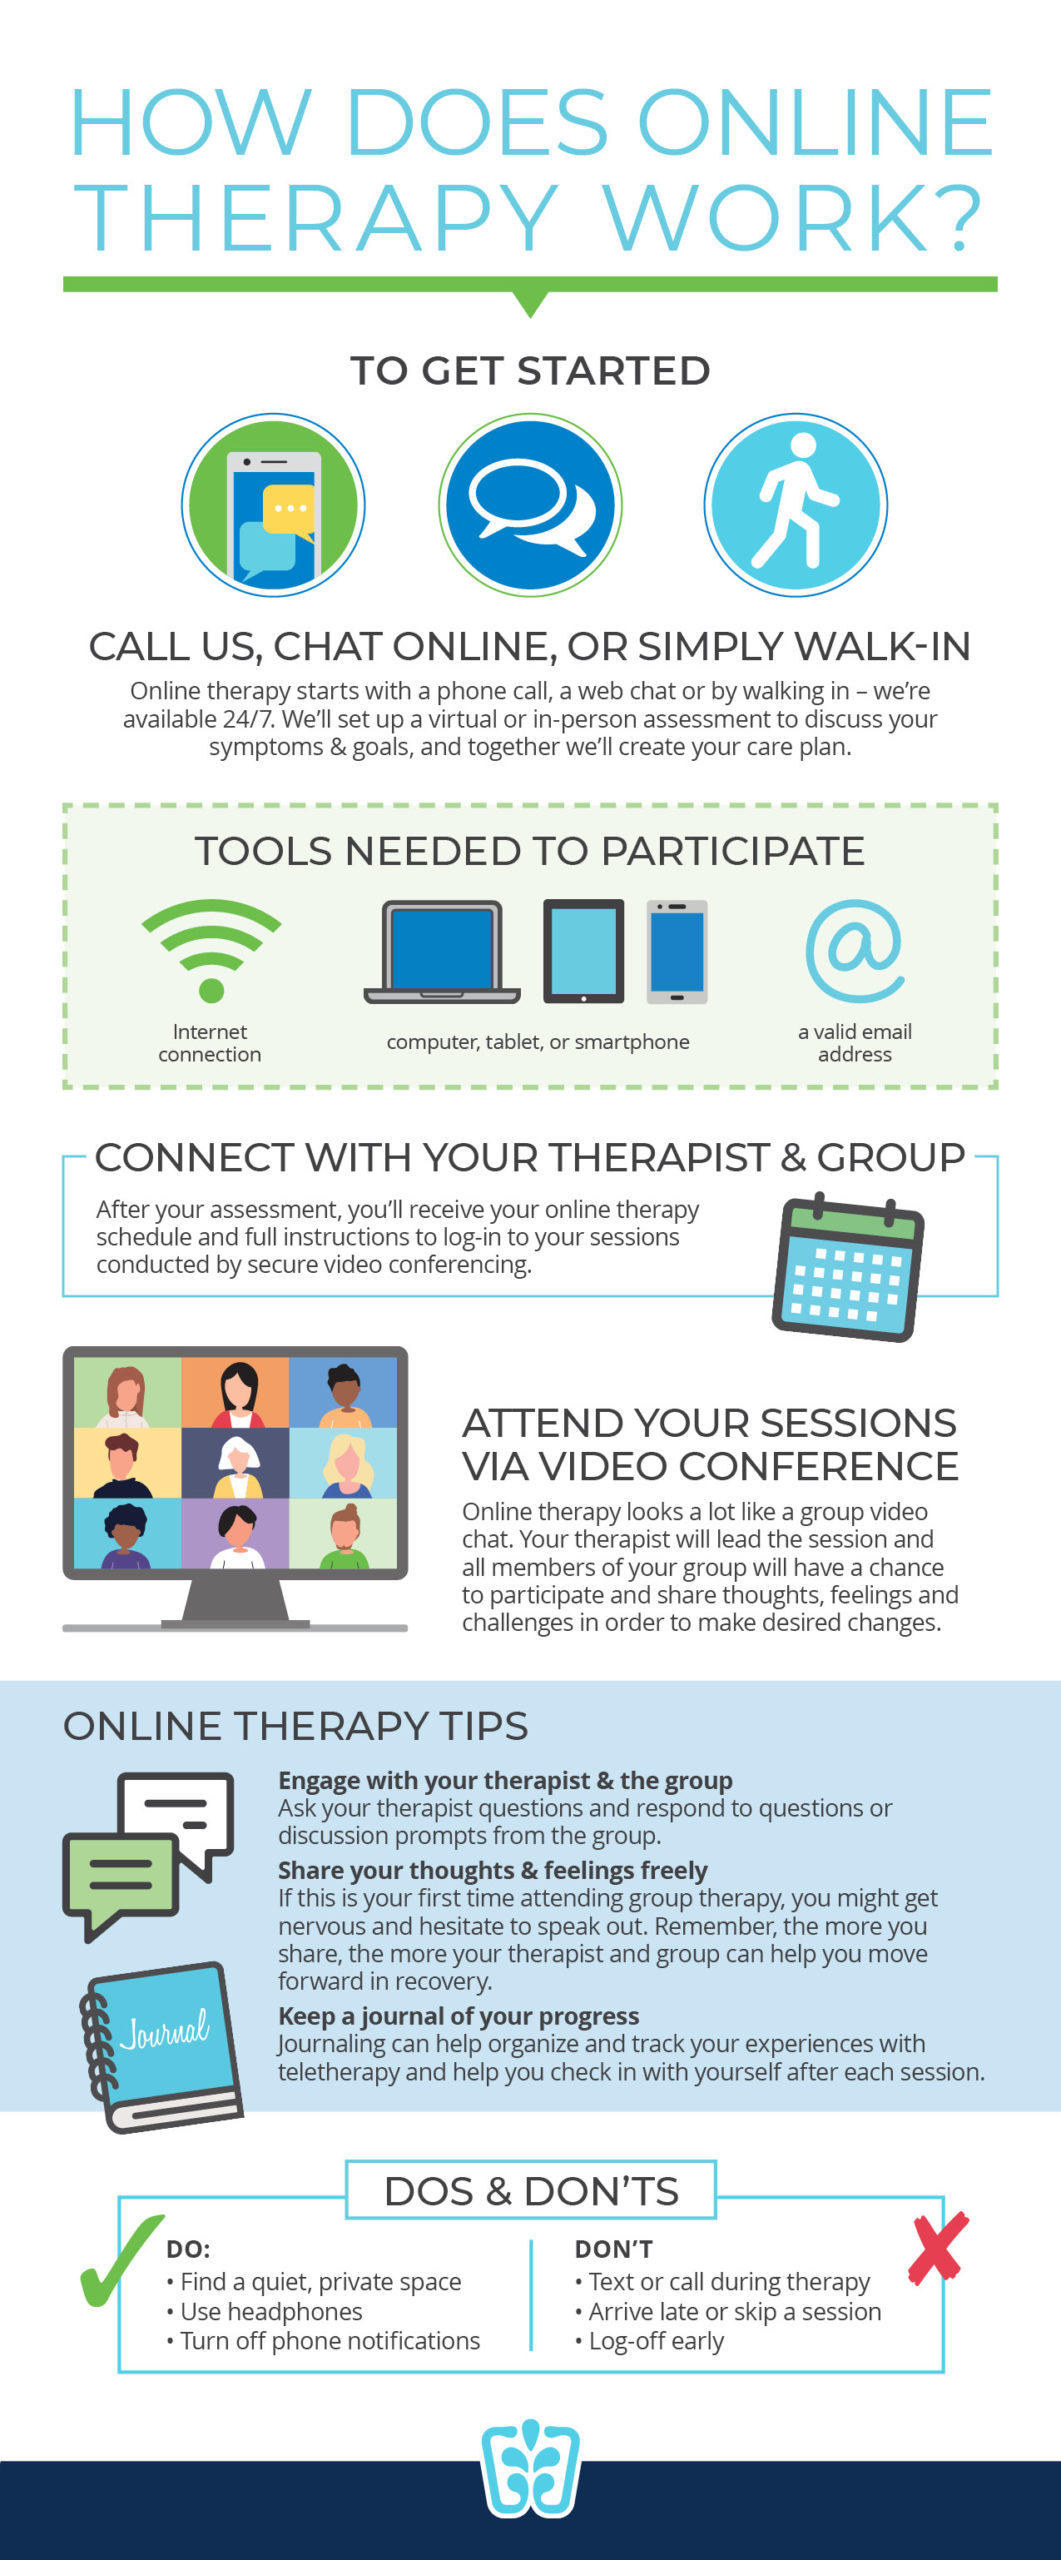 Infographic describing the process of online therapy including steps to get started, tips, and best practices.